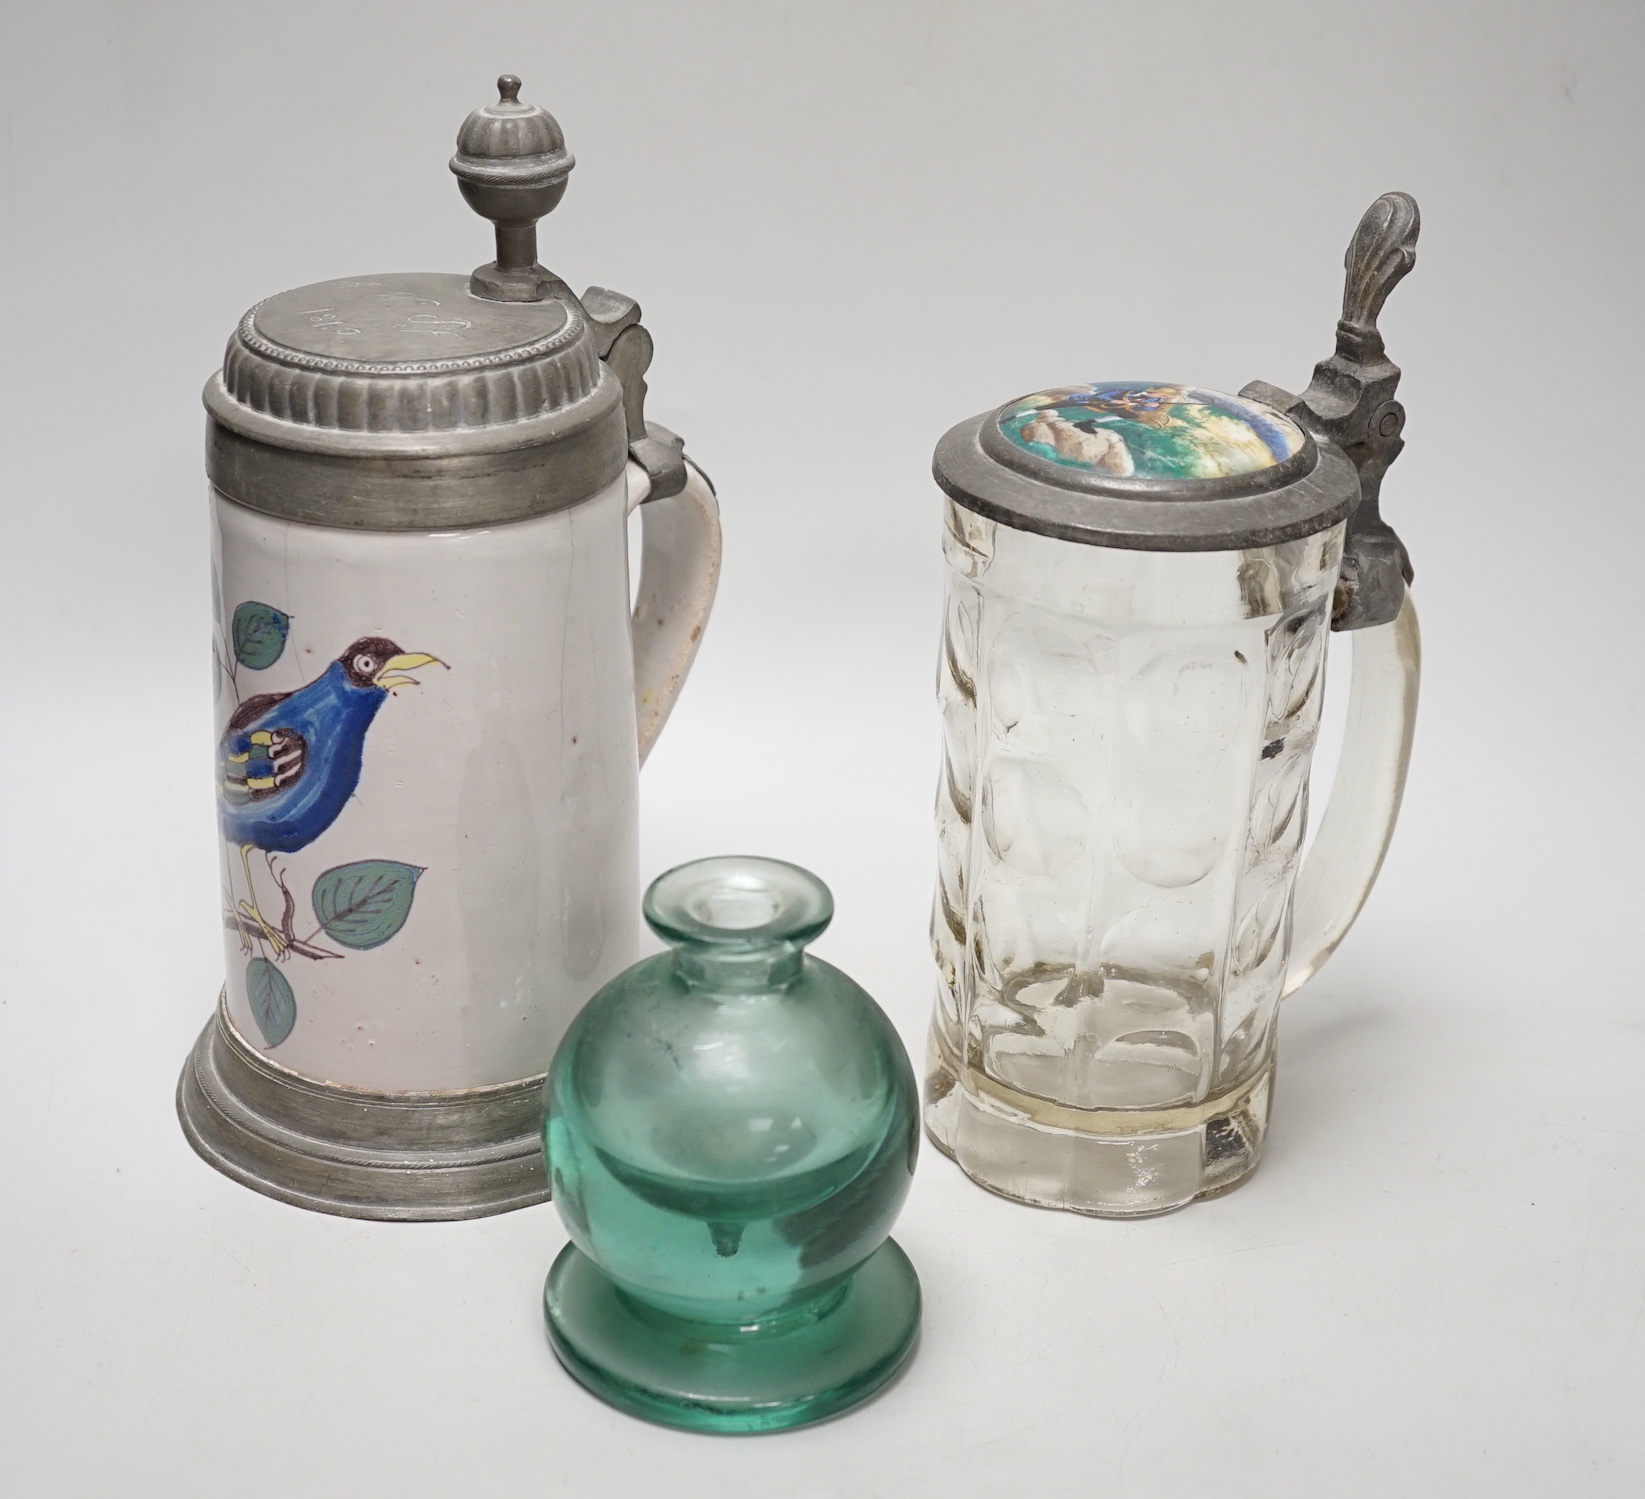 A German faience stein, dated 1819, a glass stein and an inkwell, largest 24cm